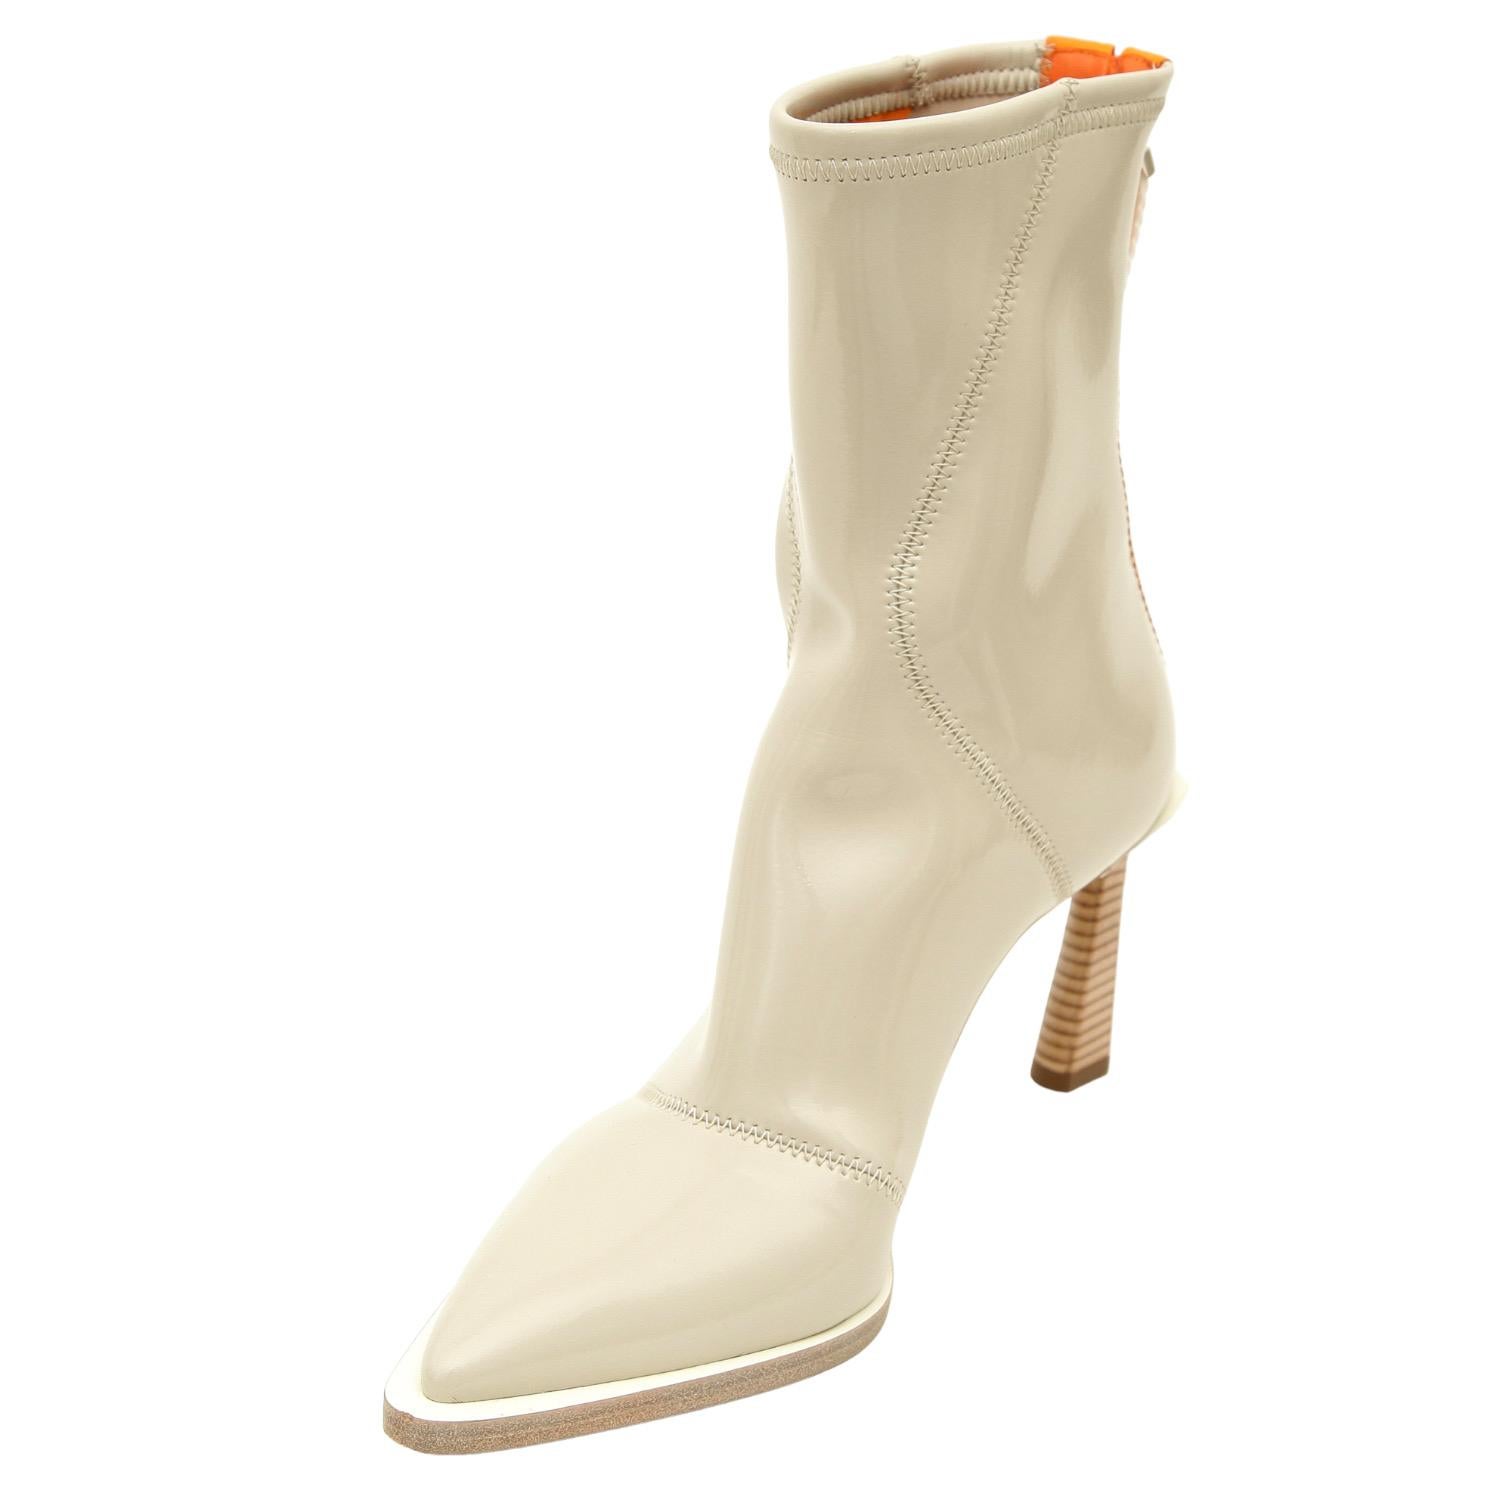 GUARANTEED AUTHENTIC FENDI FFRAME NEOPRENE ANKLE BOOTS

Details:
- Beige neoprene uppers in a glossy beige.
- Orange stripe.
- Back zipper closure.
- Pointed toe.
- Wood heel.
- Leather soles.
- Comes with designer dust bag.

Size: 38

Measurements